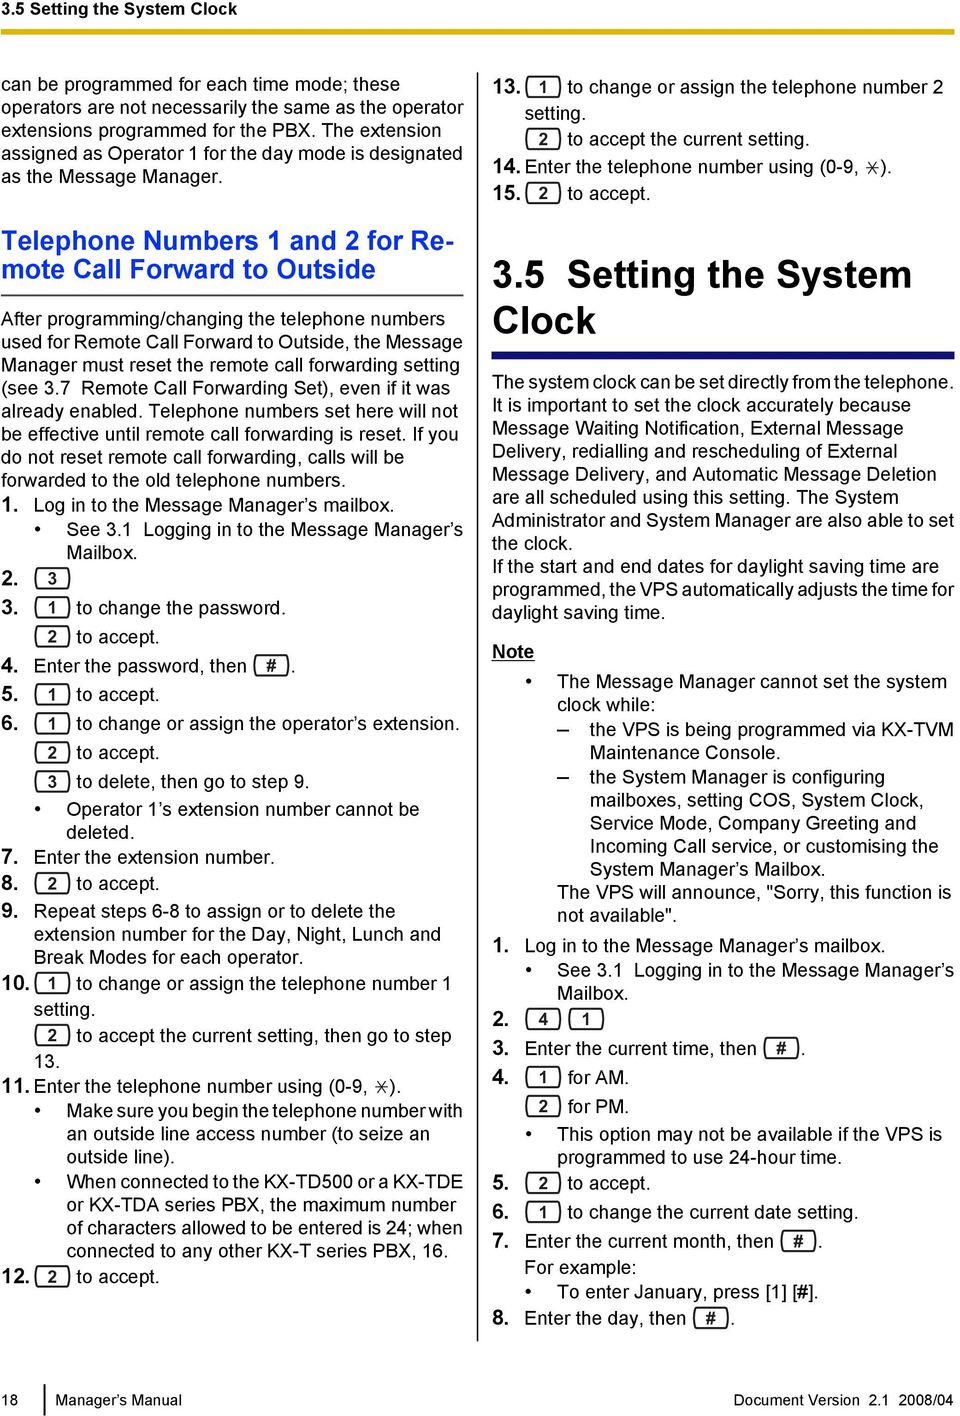 Telephone Numbers 1 and 2 for Remote Call Forward to Outside After programming/changing the telephone numbers used for Remote Call Forward to Outside, the Message Manager must reset the remote call